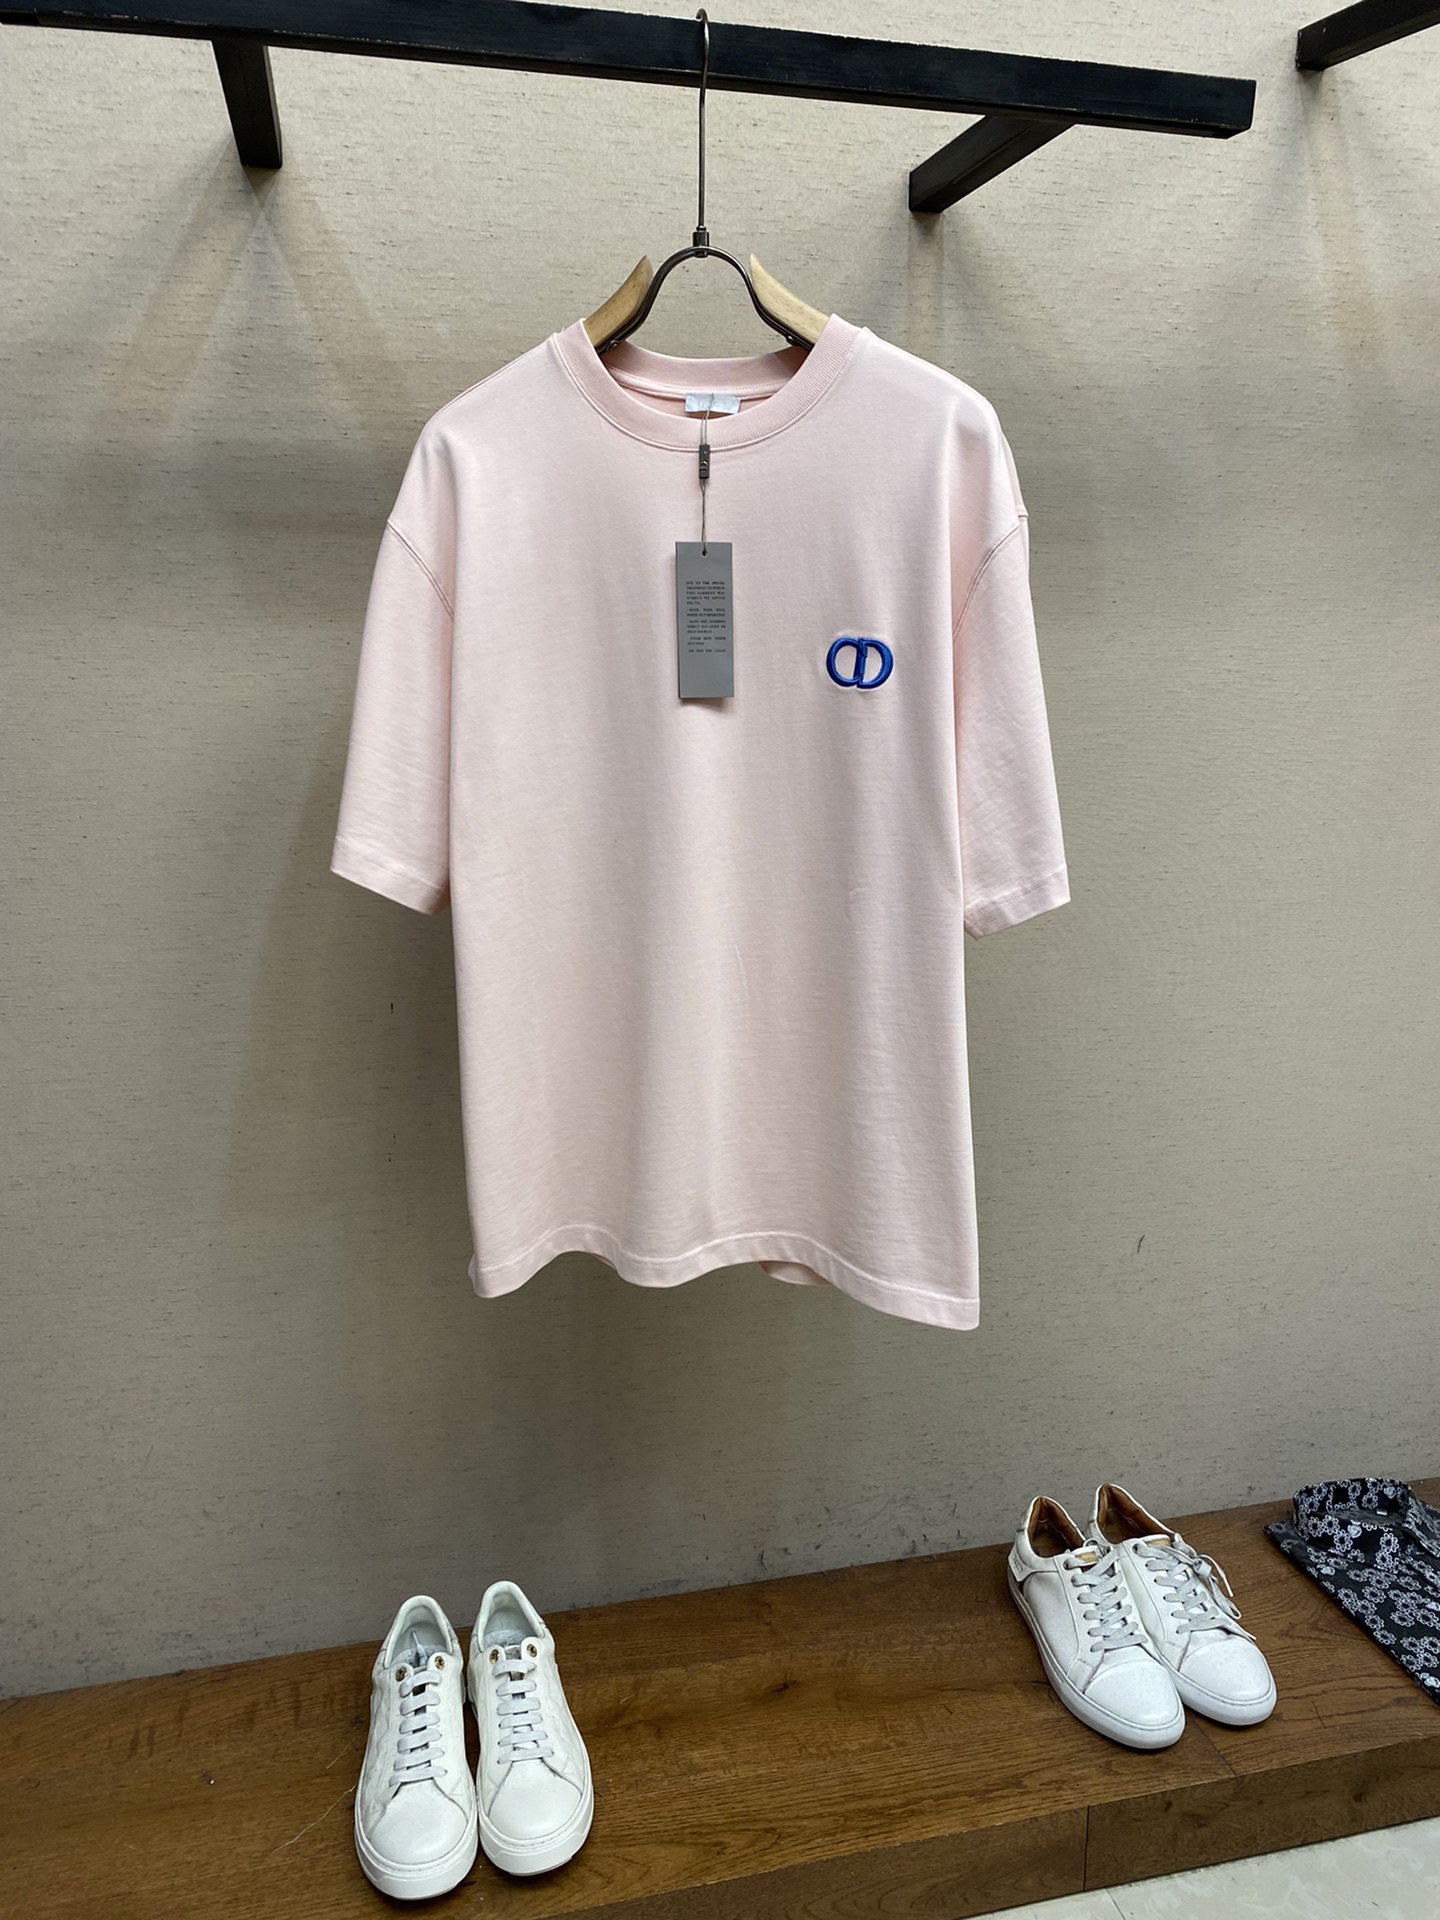 Dior Clothing T-Shirt Embroidery Cotton Knitting Spring Collection Casual